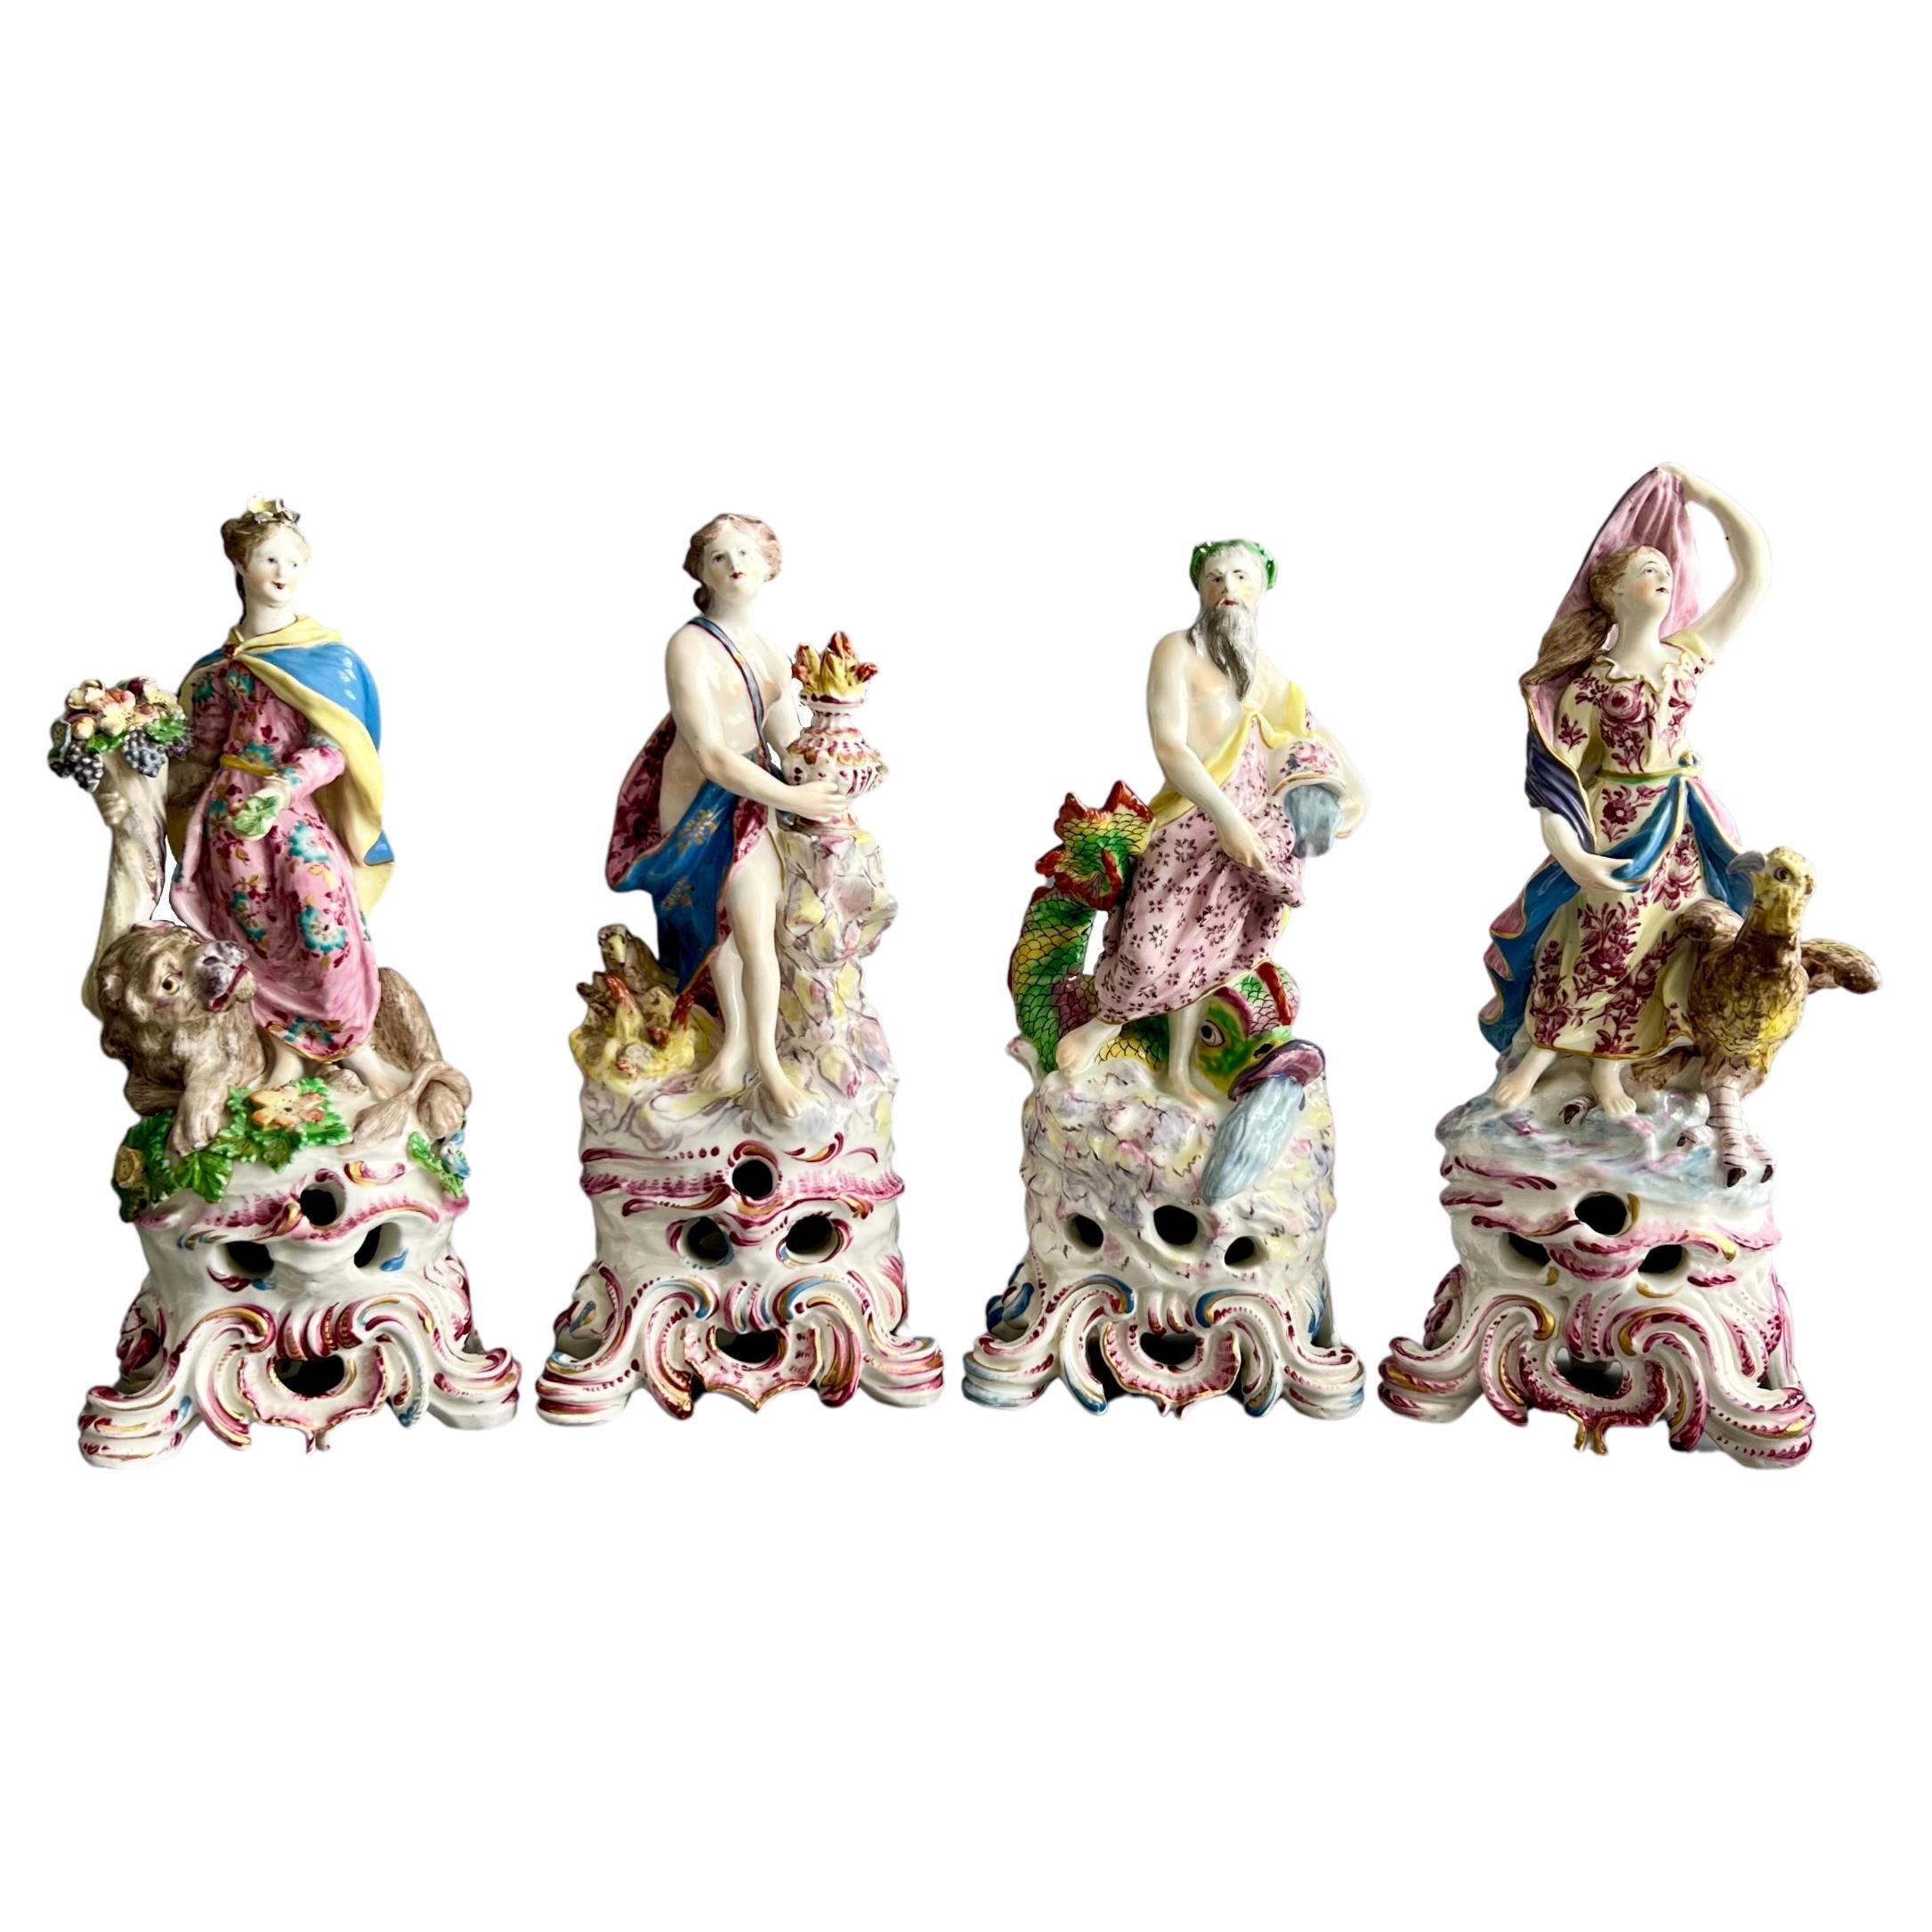 Bow Complete Set of Porcelain Figures "The Four Elements", Rococo, circa 1765 For Sale